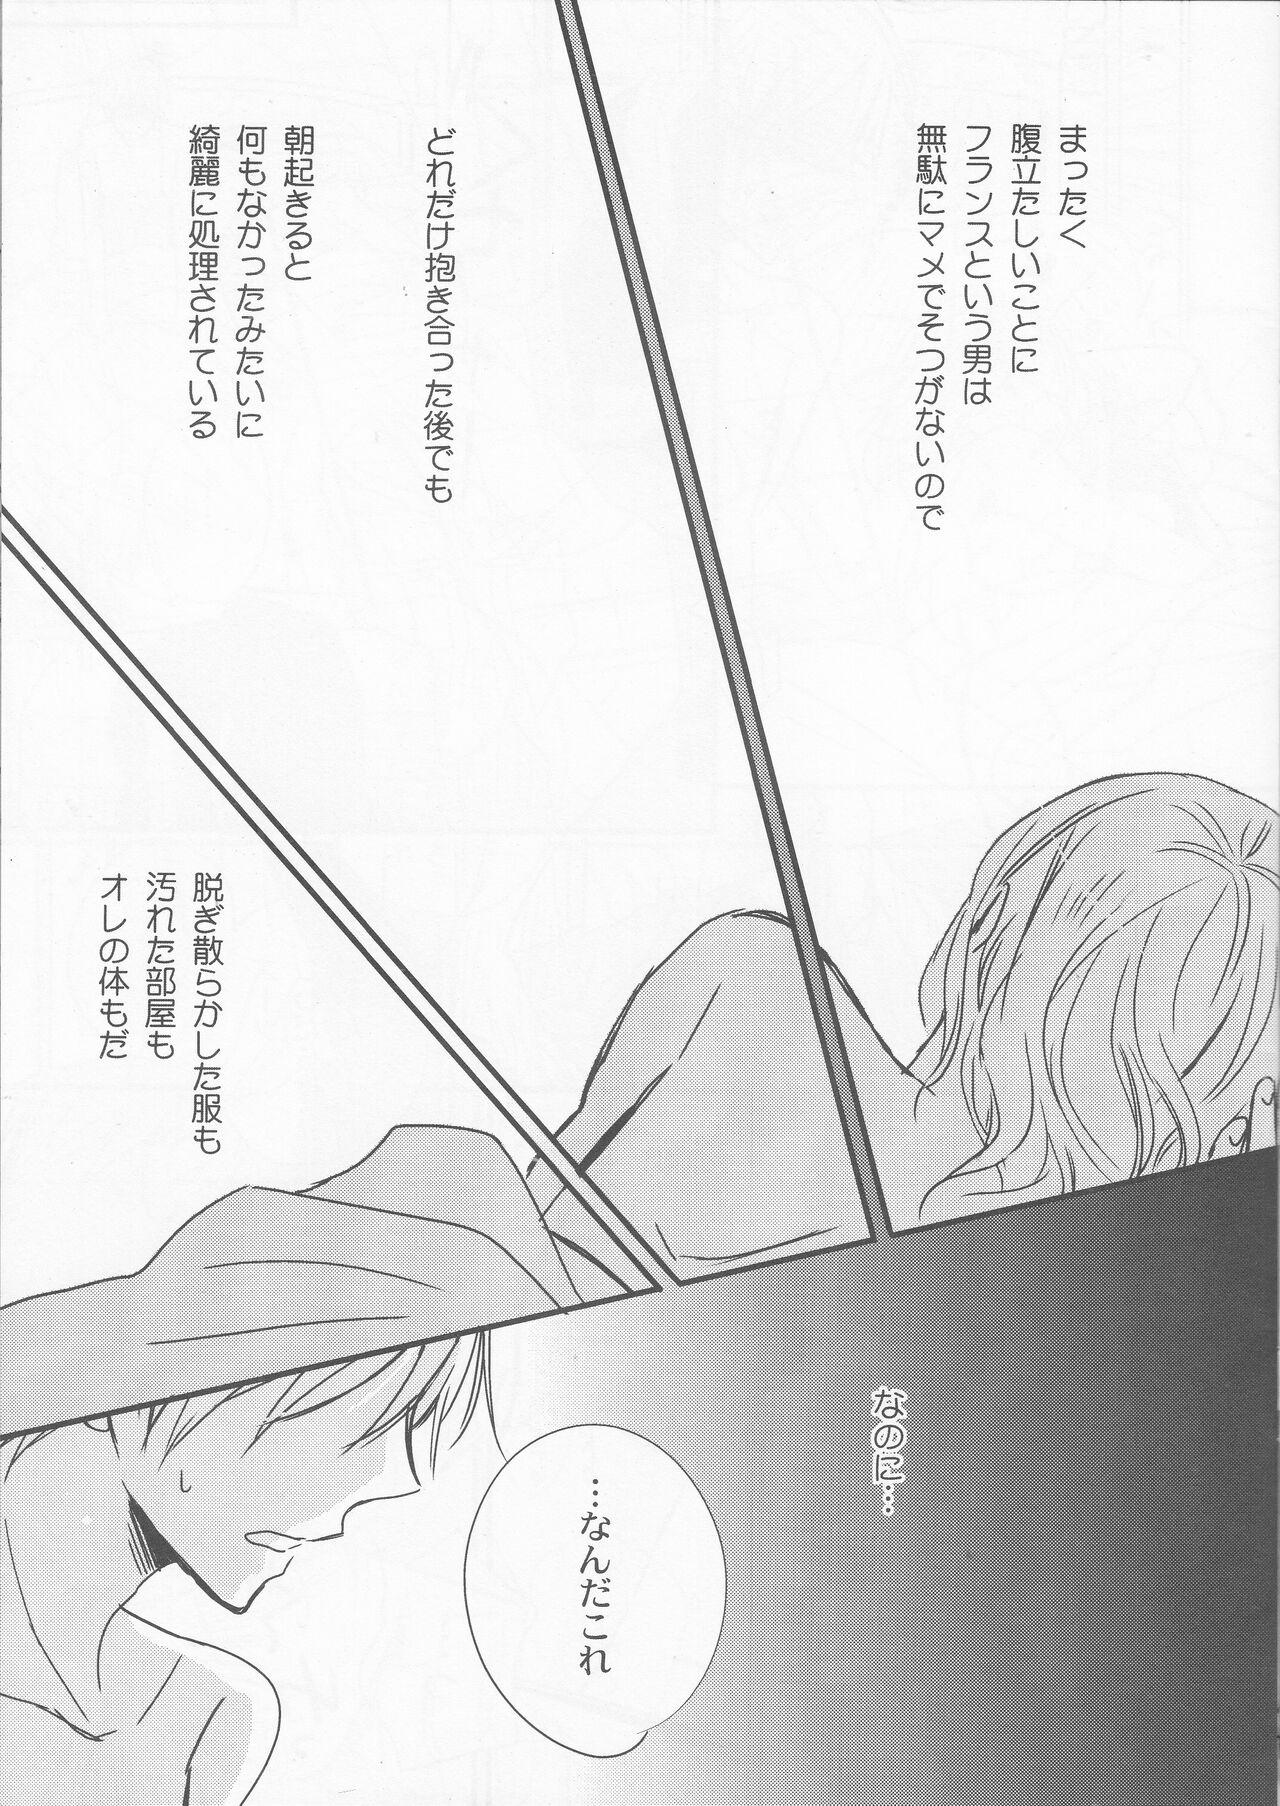 Guys unknown title - Axis powers hetalia Mamada - Page 4